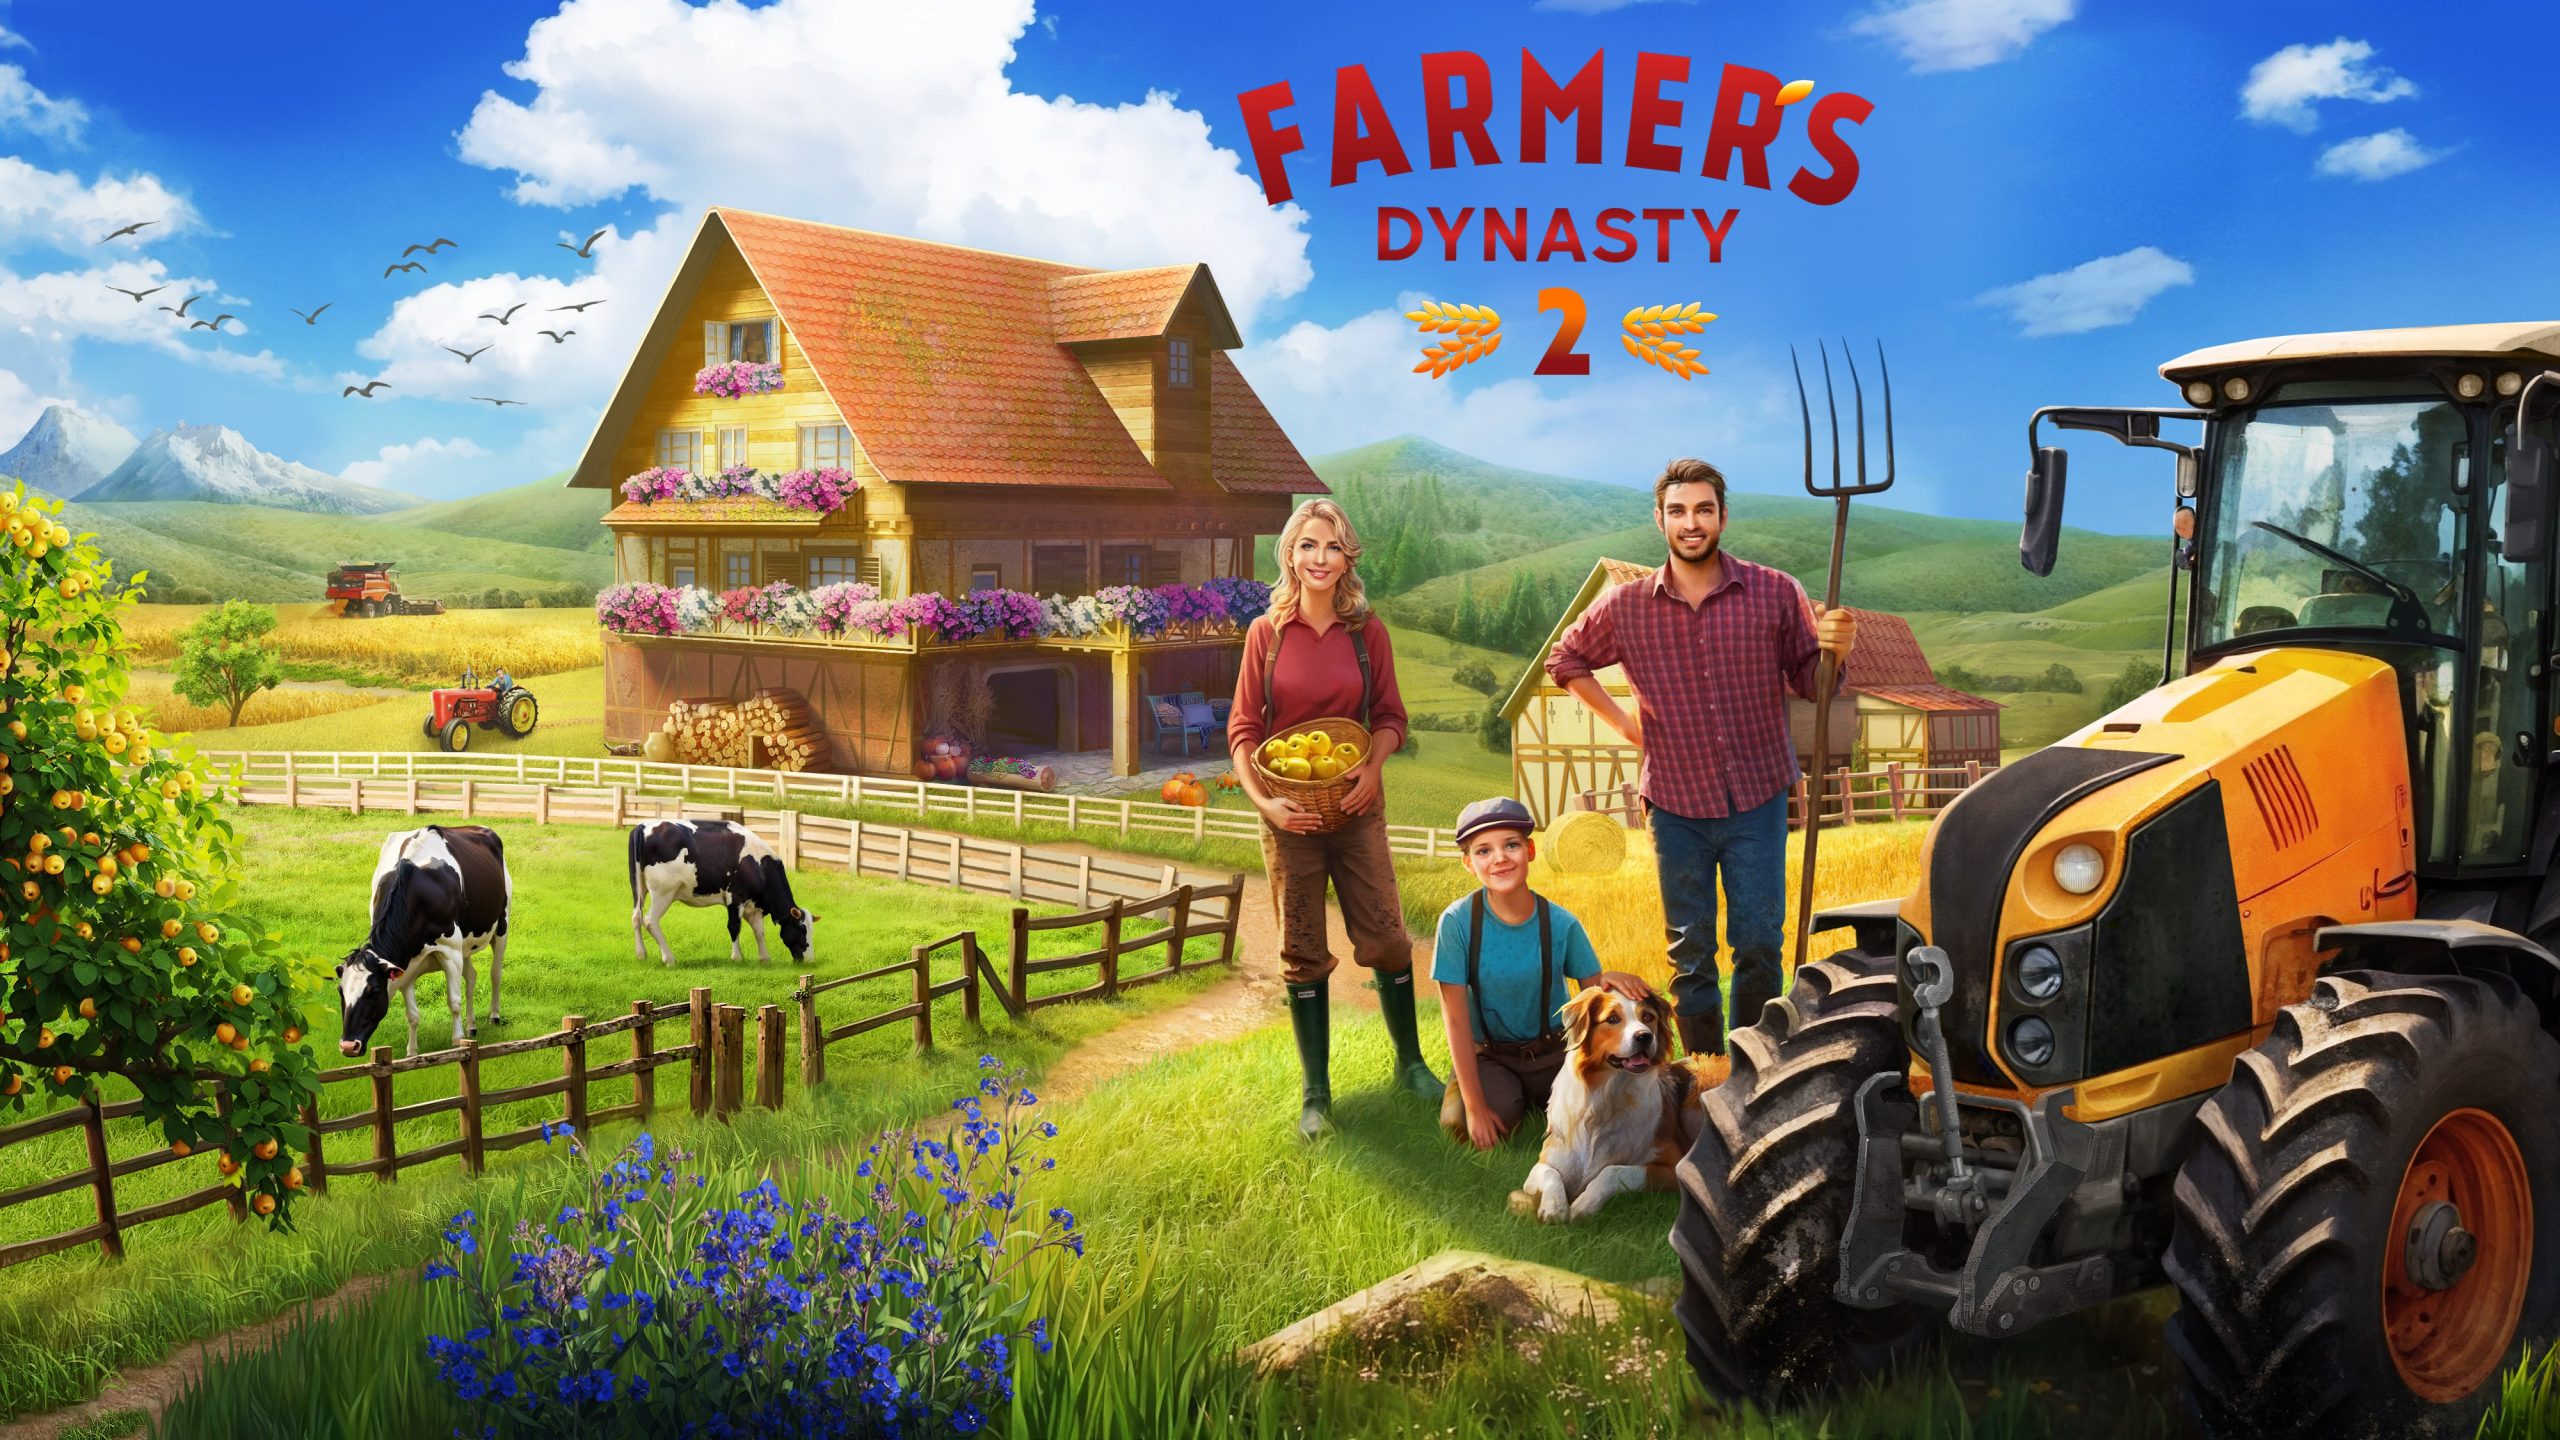 Ranch Simulator Announces Its Early Access Release Date